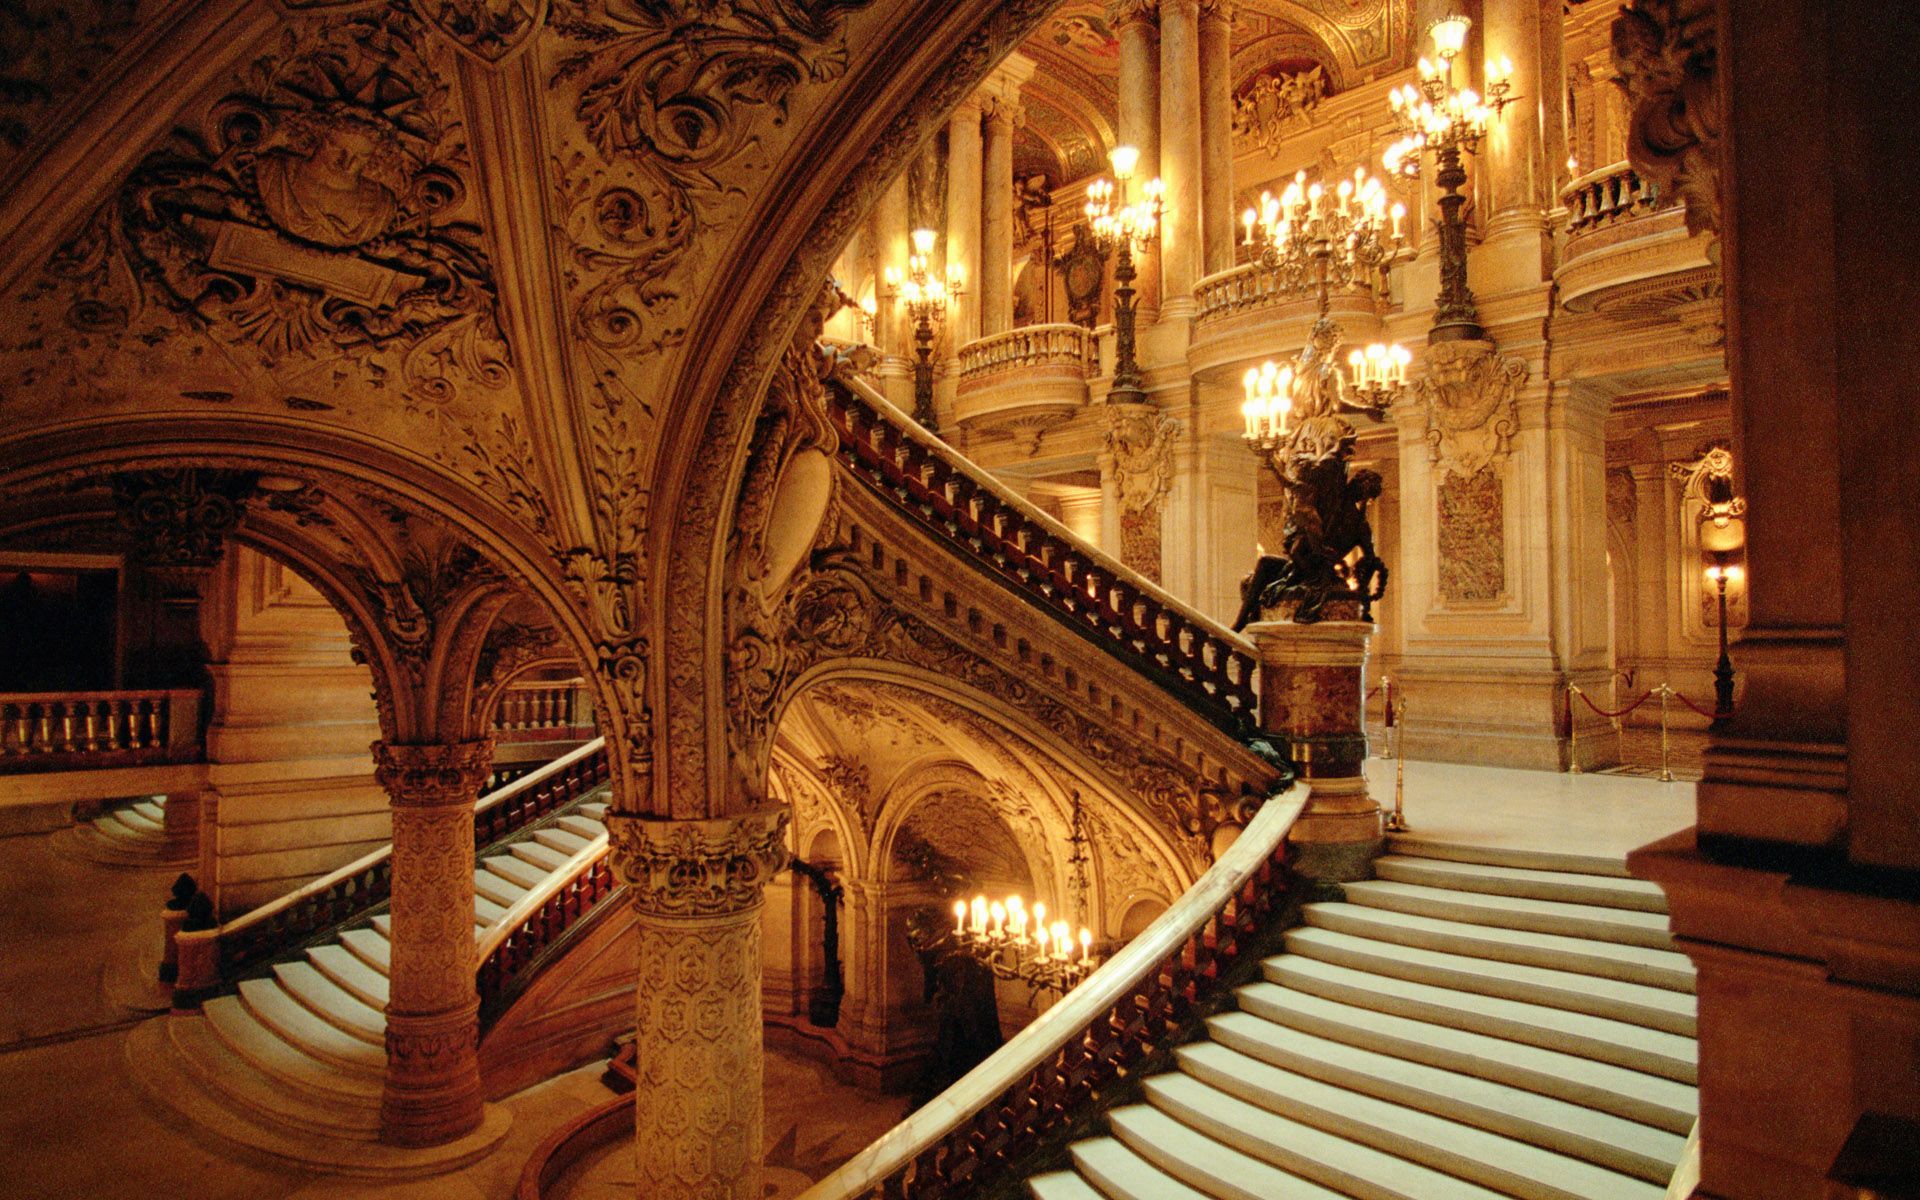 A staircase in an ornate building - Castle